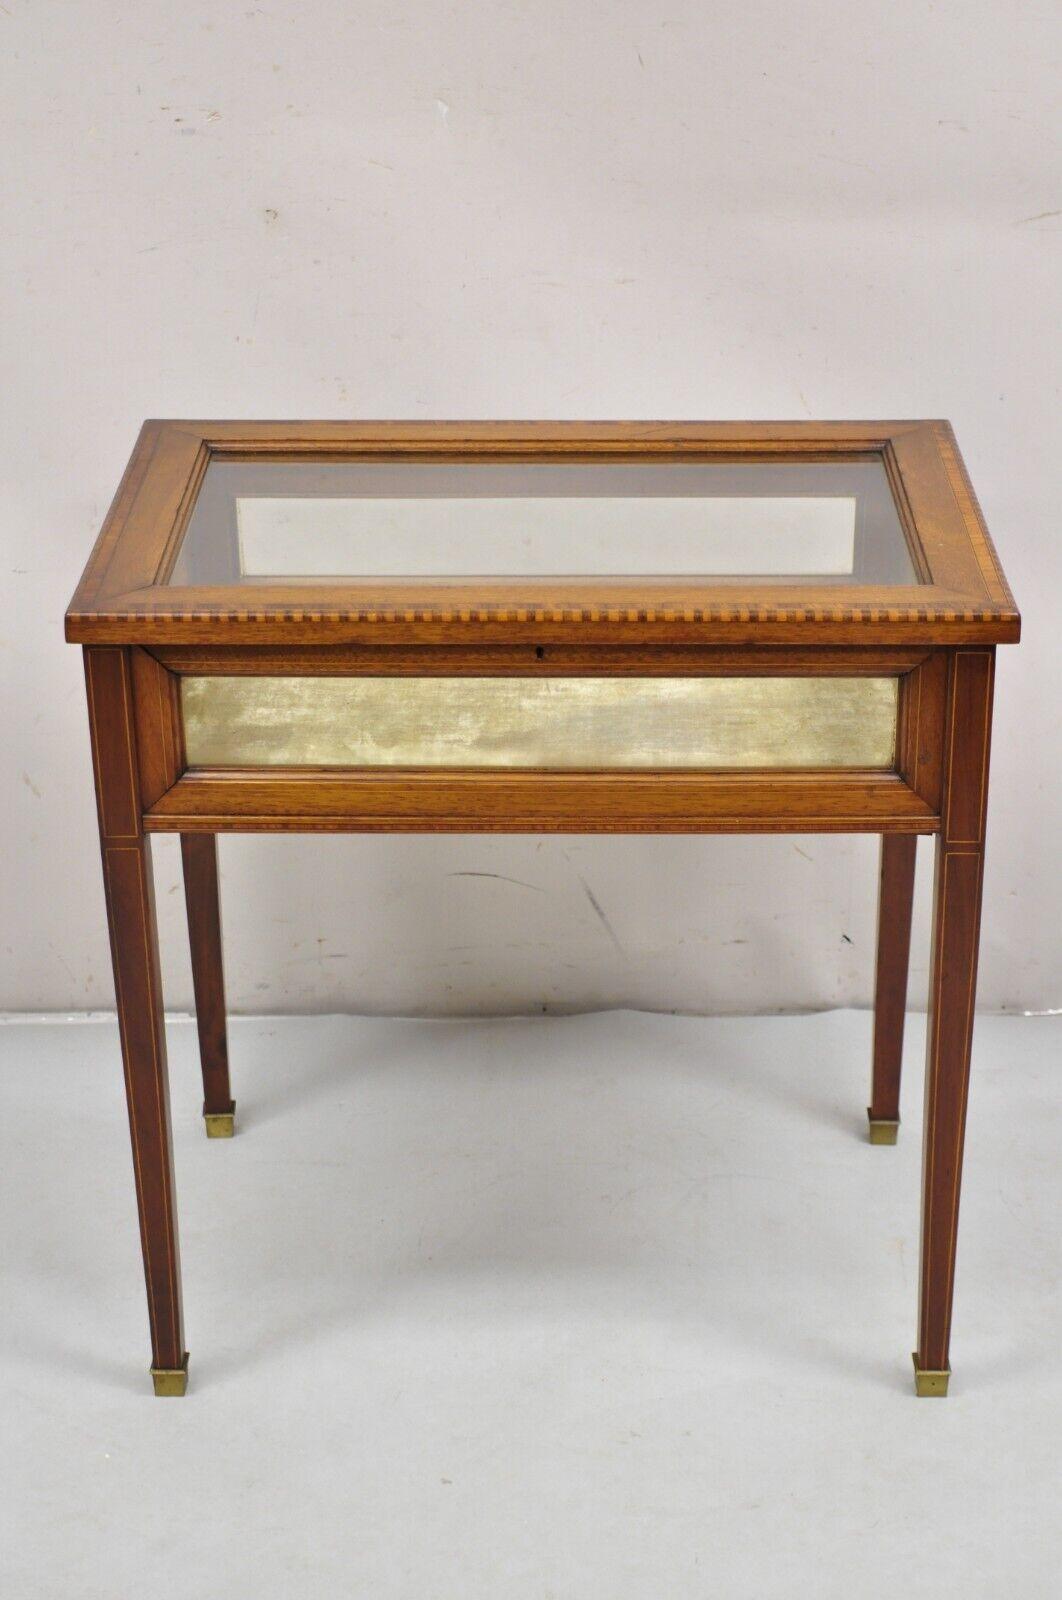 Antique English Edwardian Inlaid Mahogany Small Bijouterie Curio Display Table. Item features satinwood pencil inlay, glass top and sides, fabric lined interior, very nice antique small display table, no key, unlocked. Circa 19th Century.